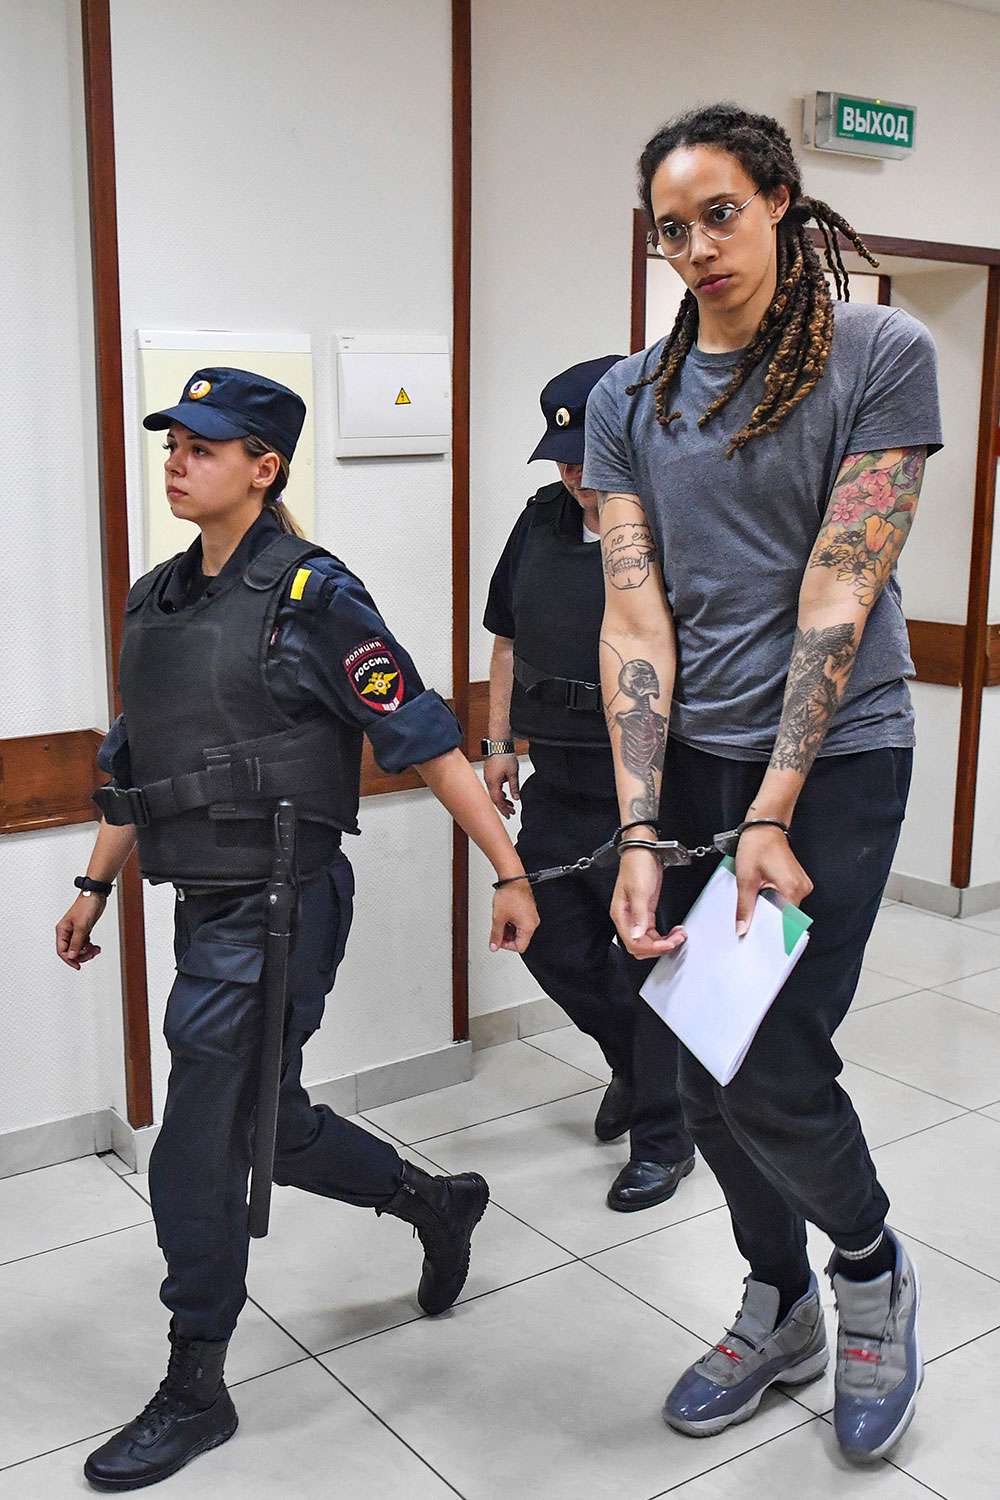 August 4, 2022, Moscow, Russia: US Olympic basketball champion BRITTNEY GRINER (R) is escorted for the verdict announcement at the Khimki Municipal Court in the town of Khimki, northeast of Moscow. Griner has been found guilty of smuggling and possession of drugs and sentenced to nine years in prison. (Credit Image: © Mikhail Voskresensky/TASS via ZUMA Press)